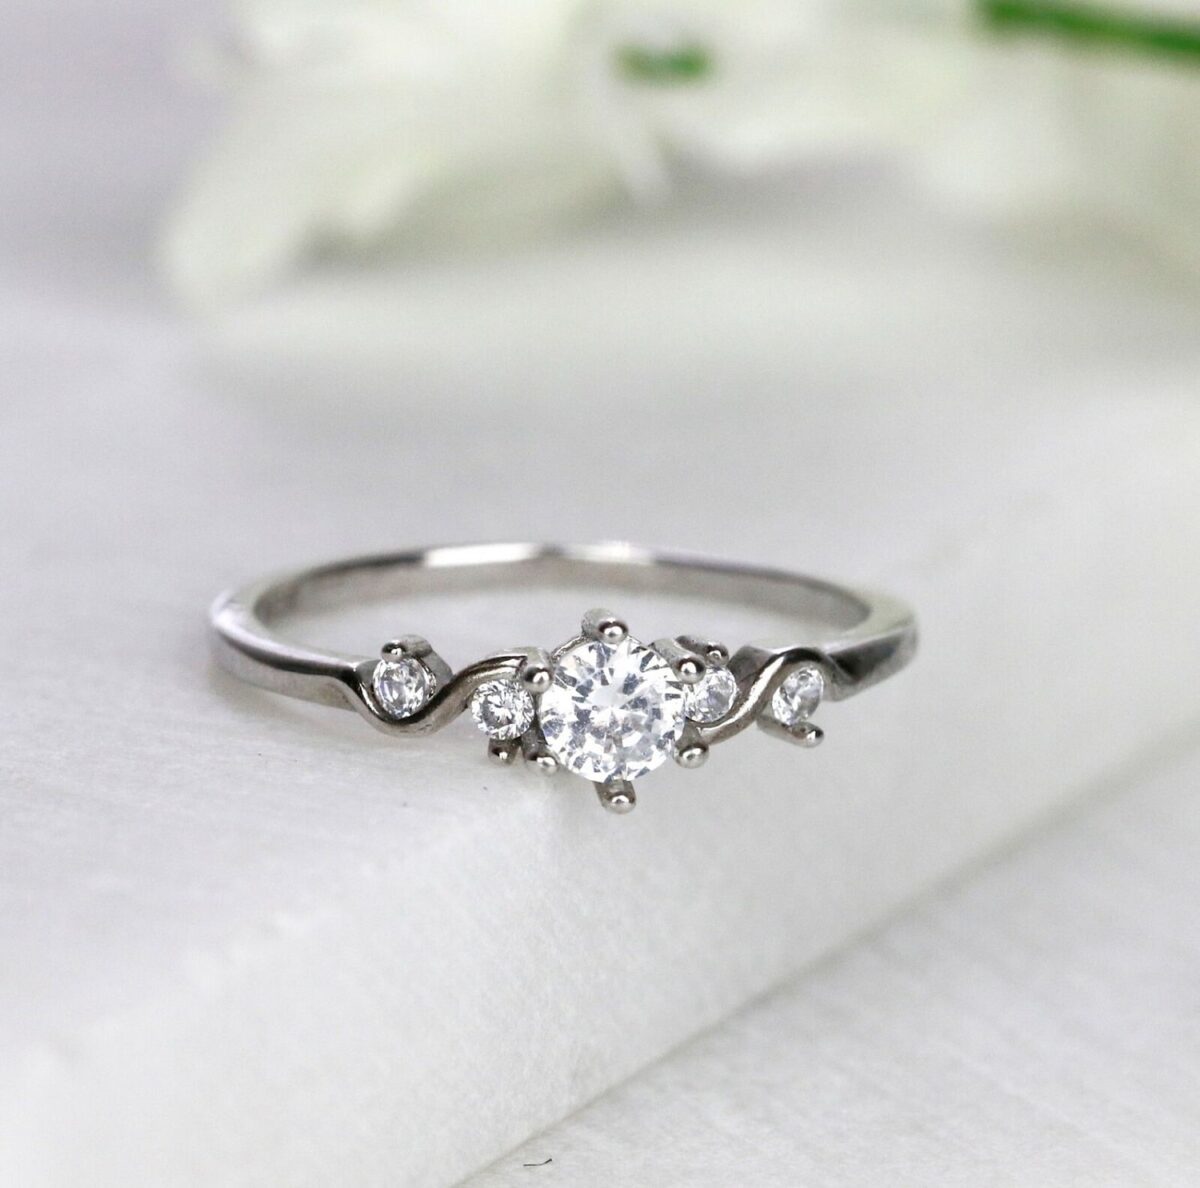 Five stone set round cut lab grown diamond engagement ring crafted in 14k white gold.